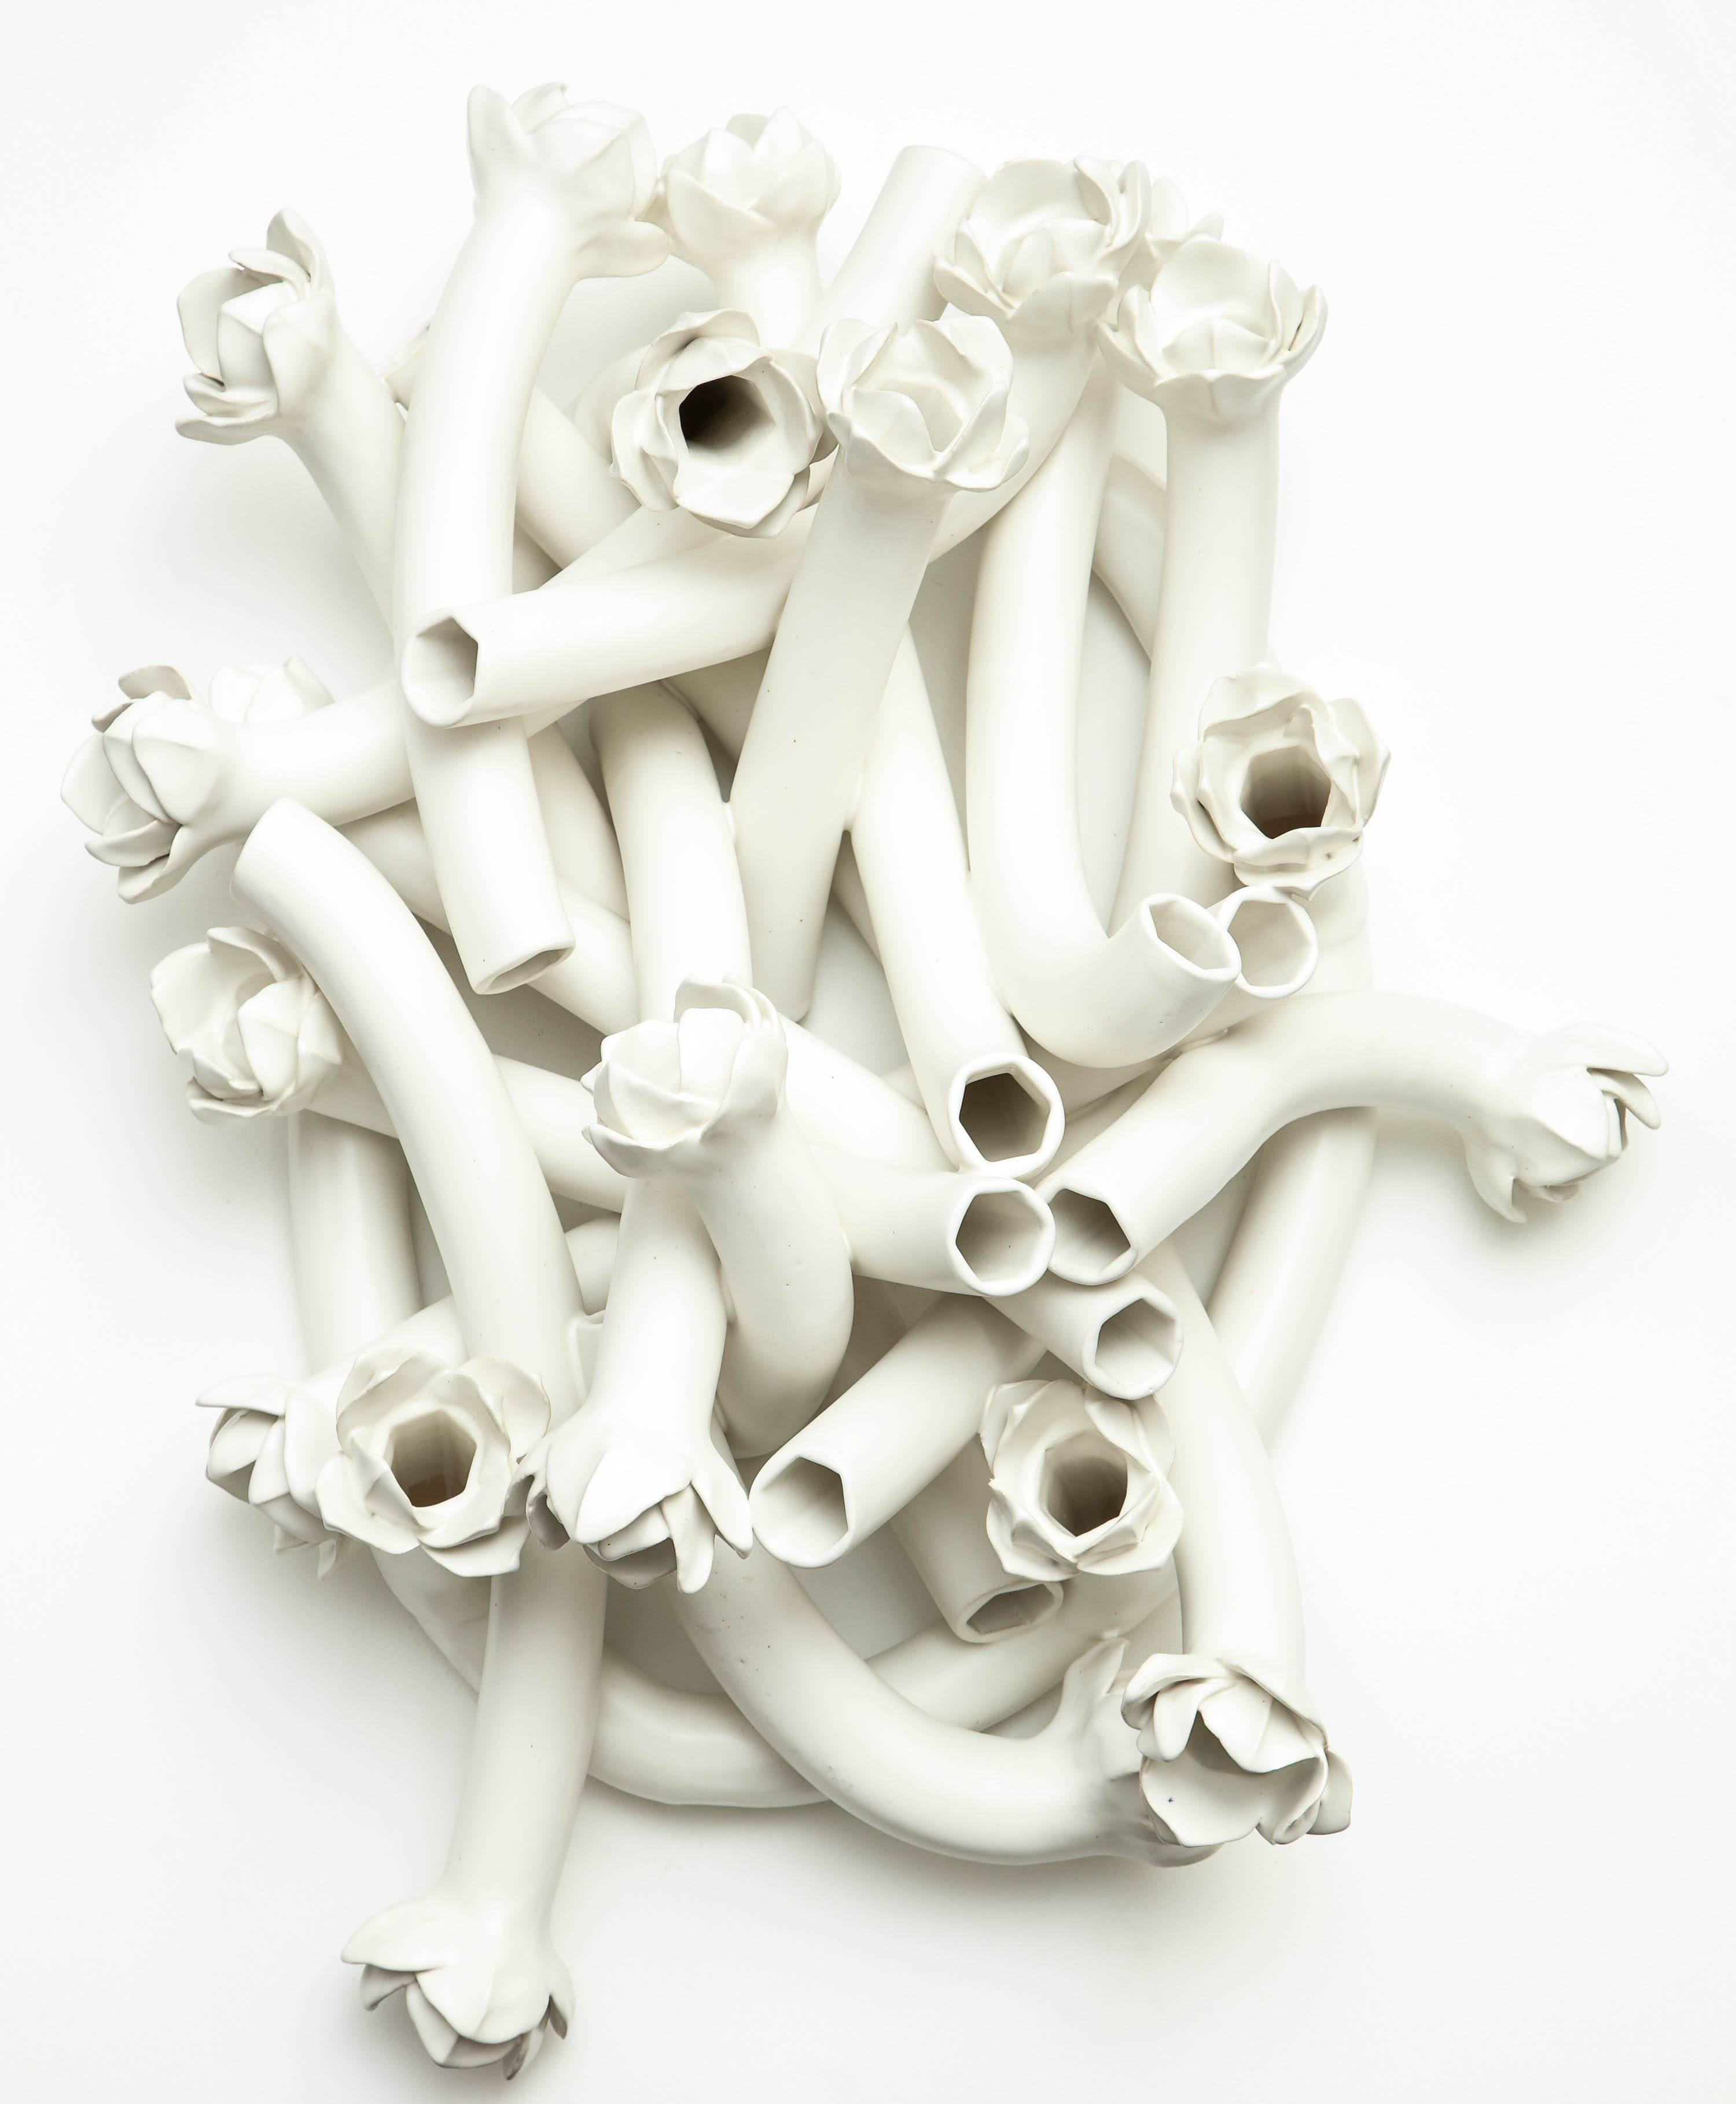 Unique, hand-thrown and glazed porcelain sculpture from the Flora Series by contemporary artist Anat Shiftan. 

Anat Shiftan (Israeli – American, b. 1955)
Sculpture from the Flora series, 2017
Porcelain
10